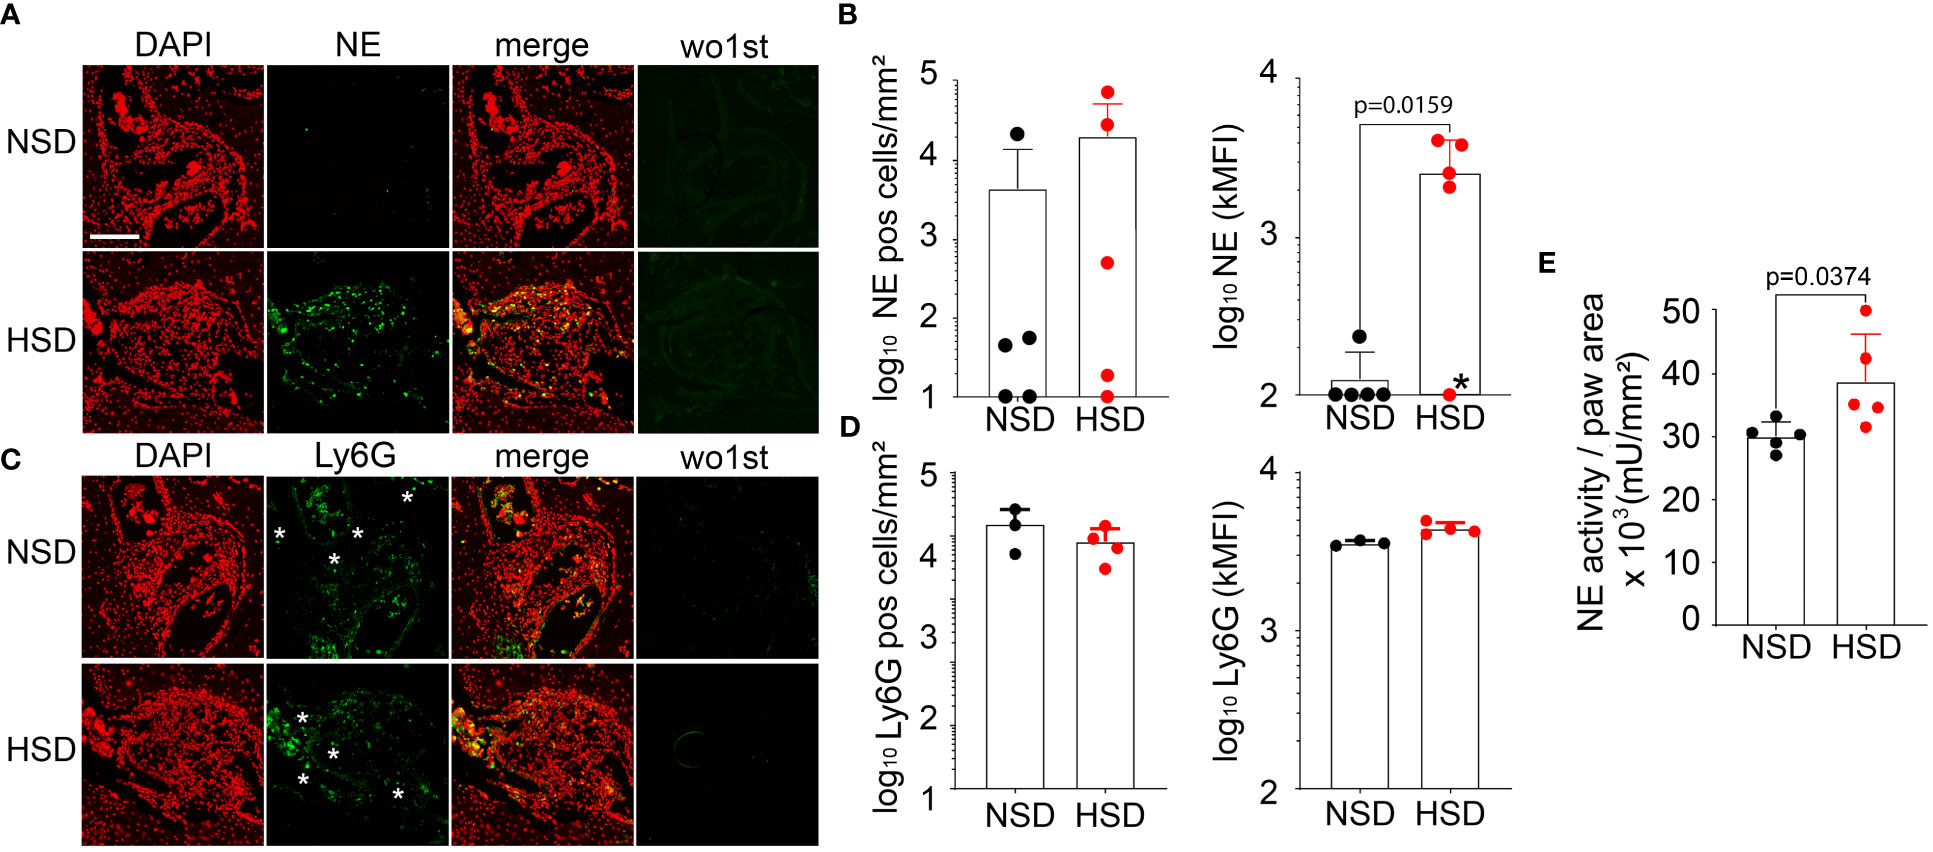 Frontiers Suppression Of Neutrophils By Sodium Exacerbates Oxidative Stress And Arthritis 9619